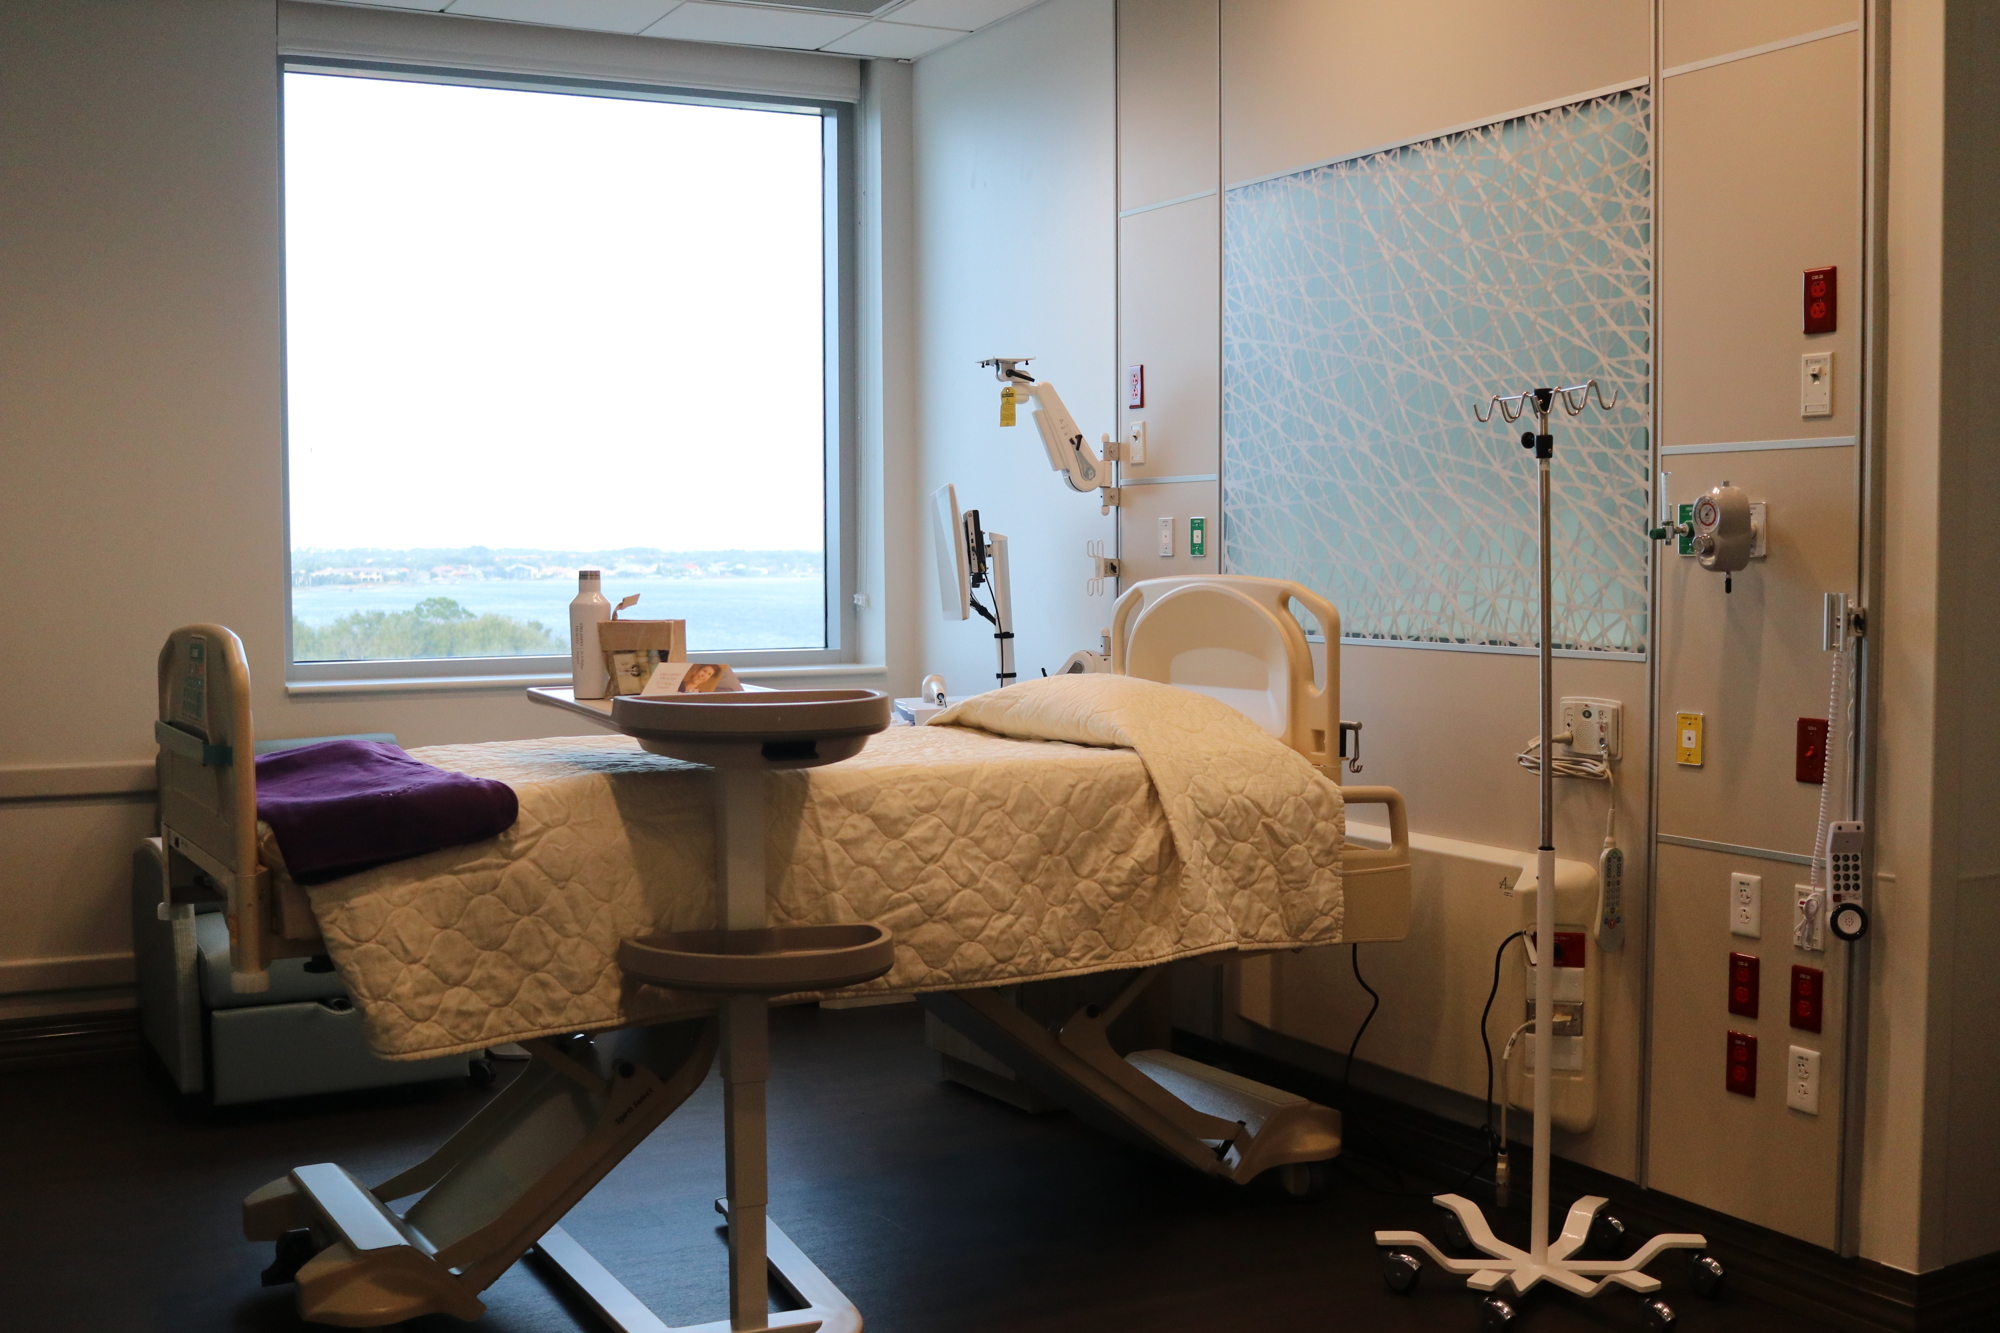 The new space at the Orlando Health Dr. P. Phillips Hospital adds 48 new rooms to the facility’s existing 237 beds.